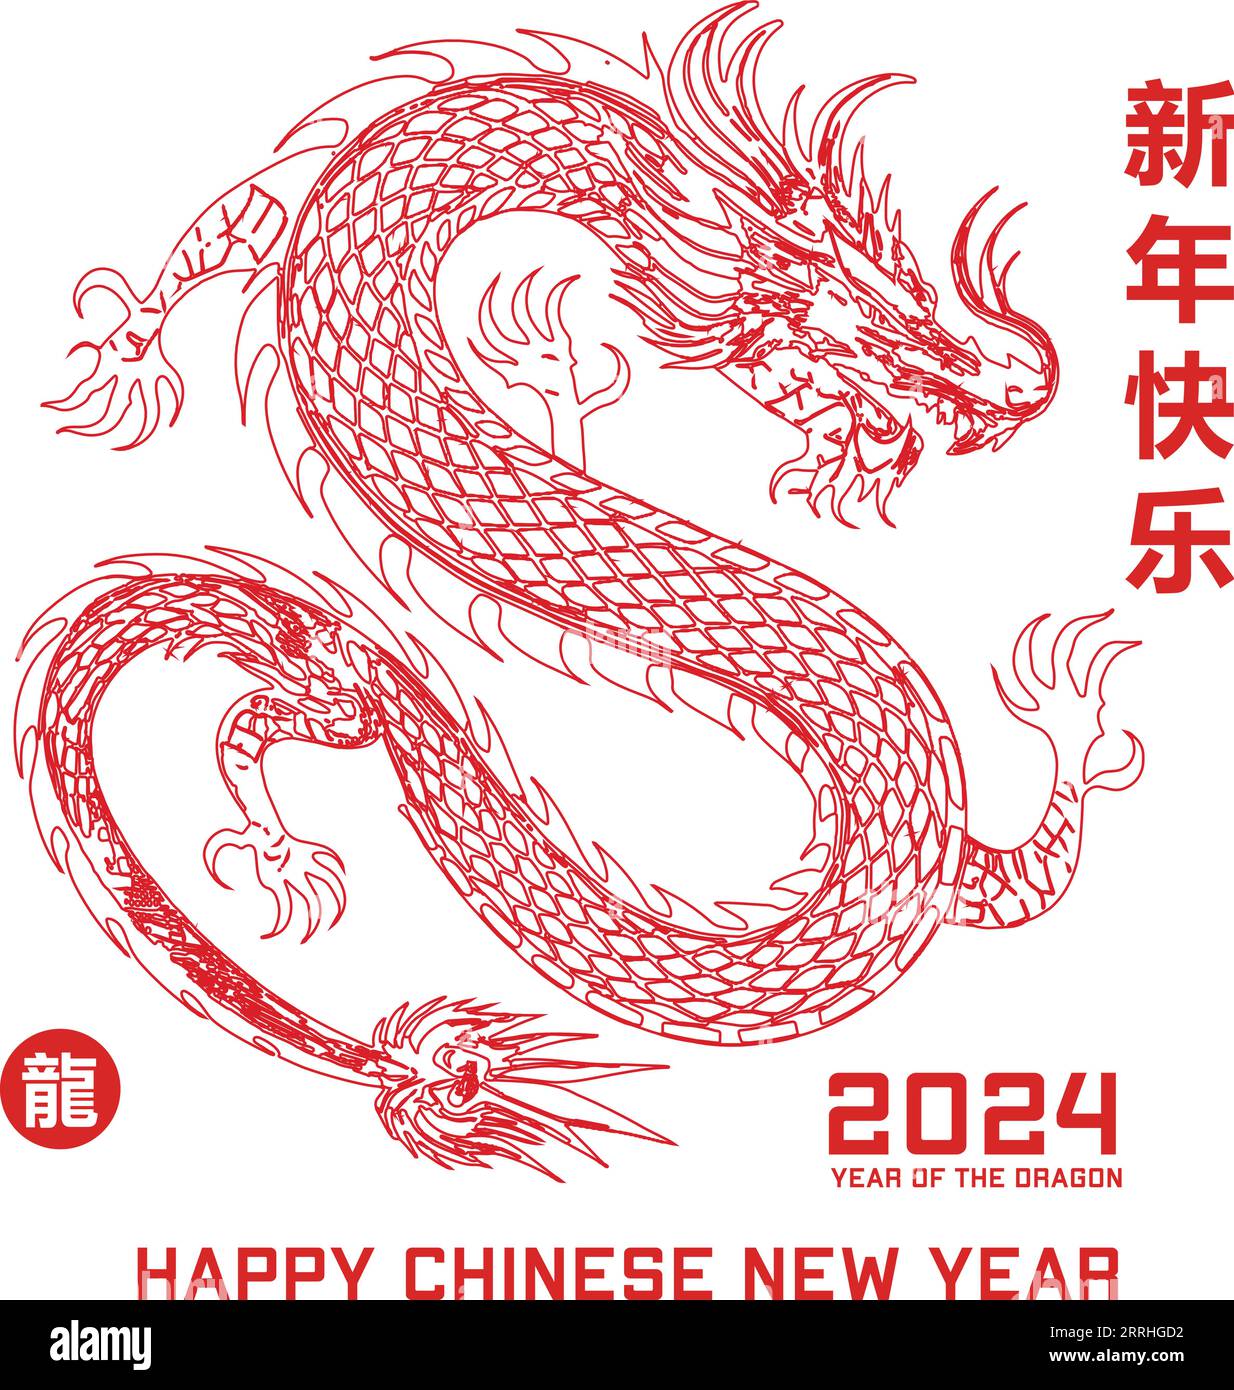 2024 Year of the Dragon New Year S Card with Dragon and Hanging Lucky Charms  Stock Vector - Illustration of doll, tumbling: 276073115